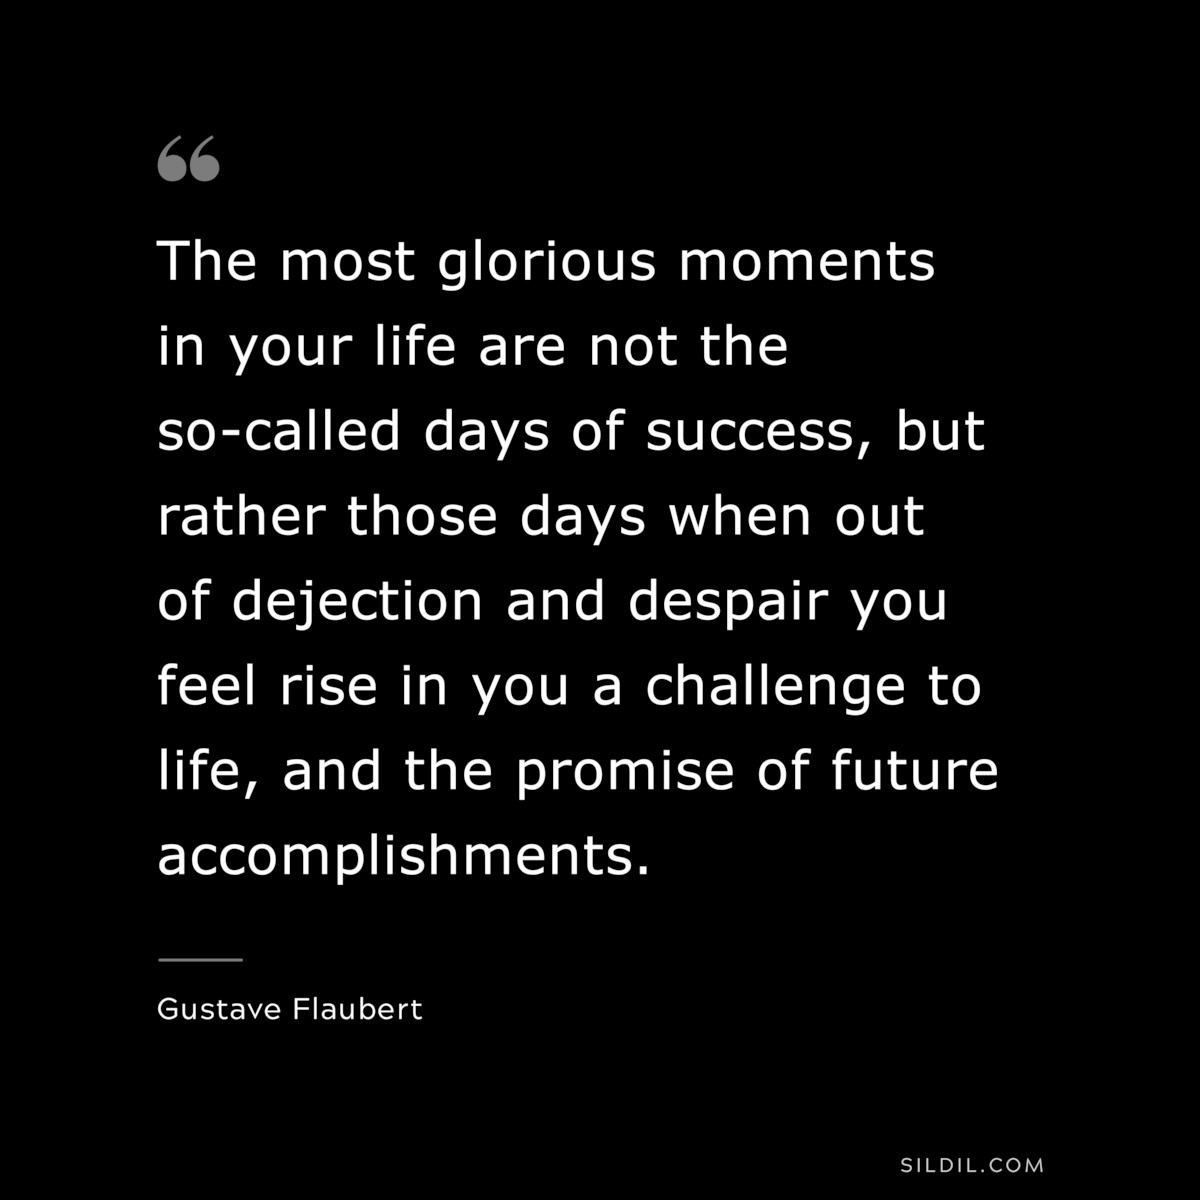 The most glorious moments in your life are not the so-called days of success, but rather those days when out of dejection and despair you feel rise in you a challenge to life, and the promise of future accomplishments. ― Gustave Flaubert